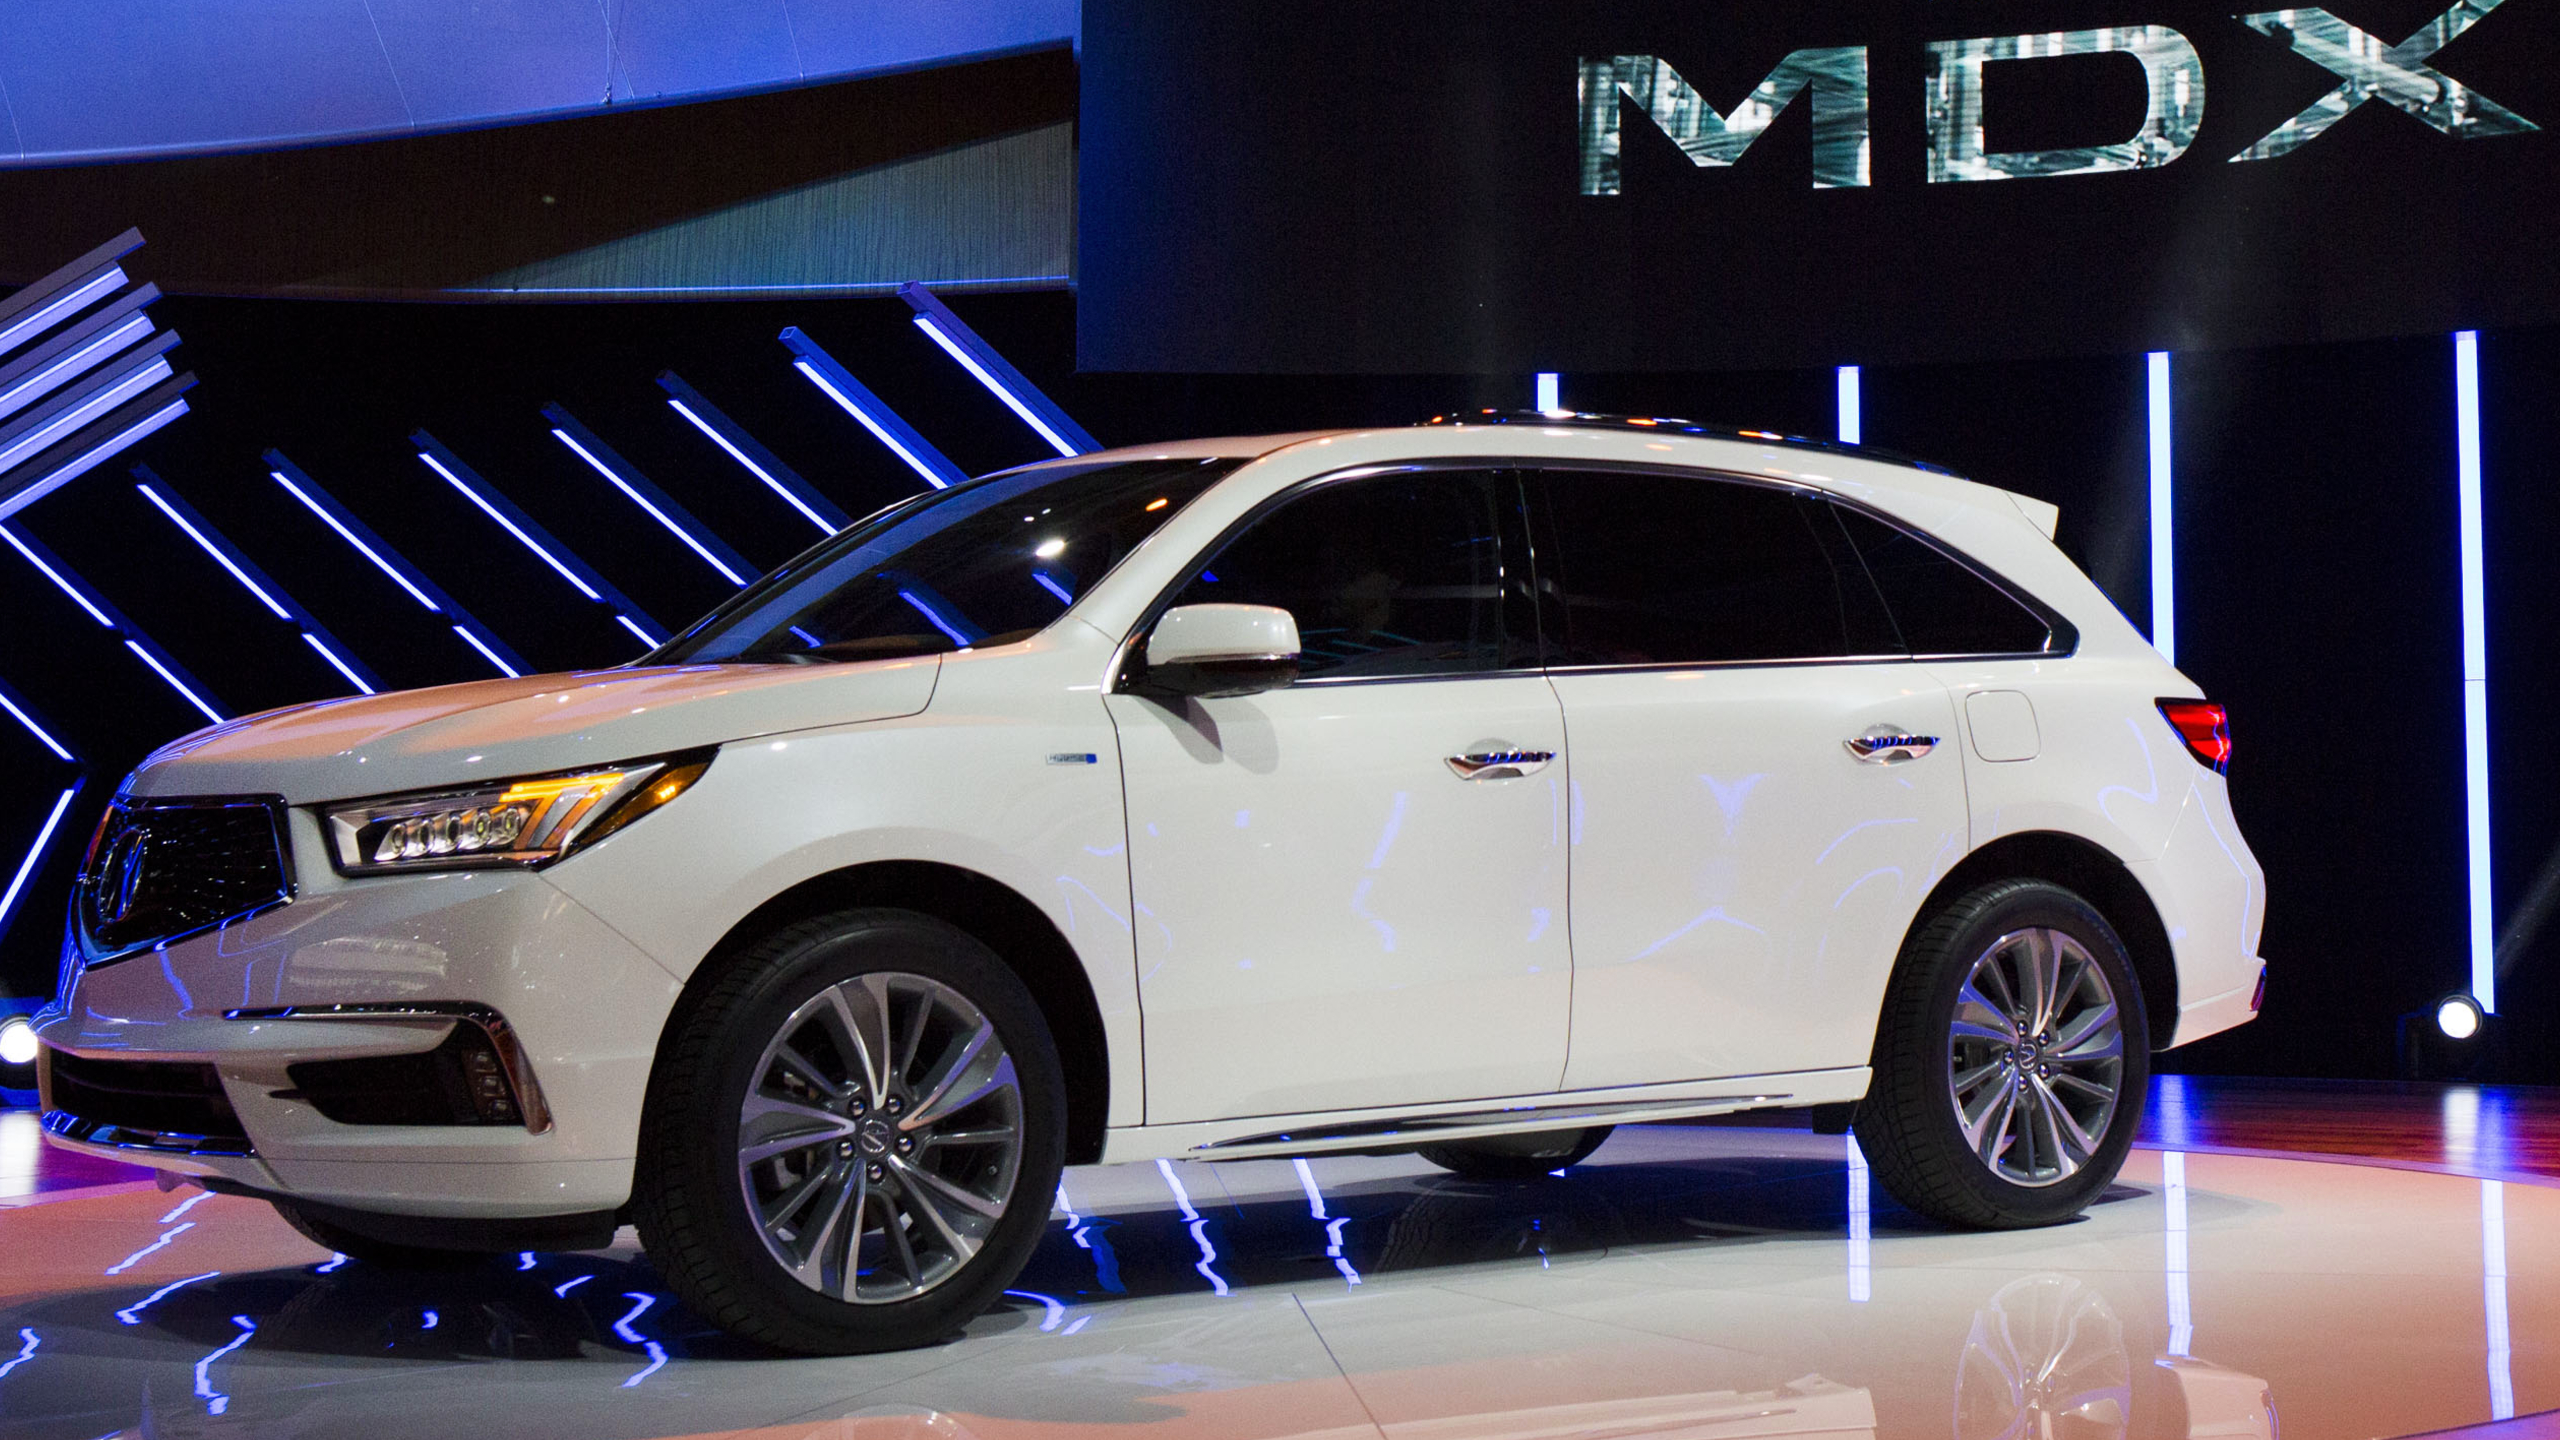 Acura MDX sports utility vehicle (SUV) is displayed during the 2016 New York International Auto Show in New York.